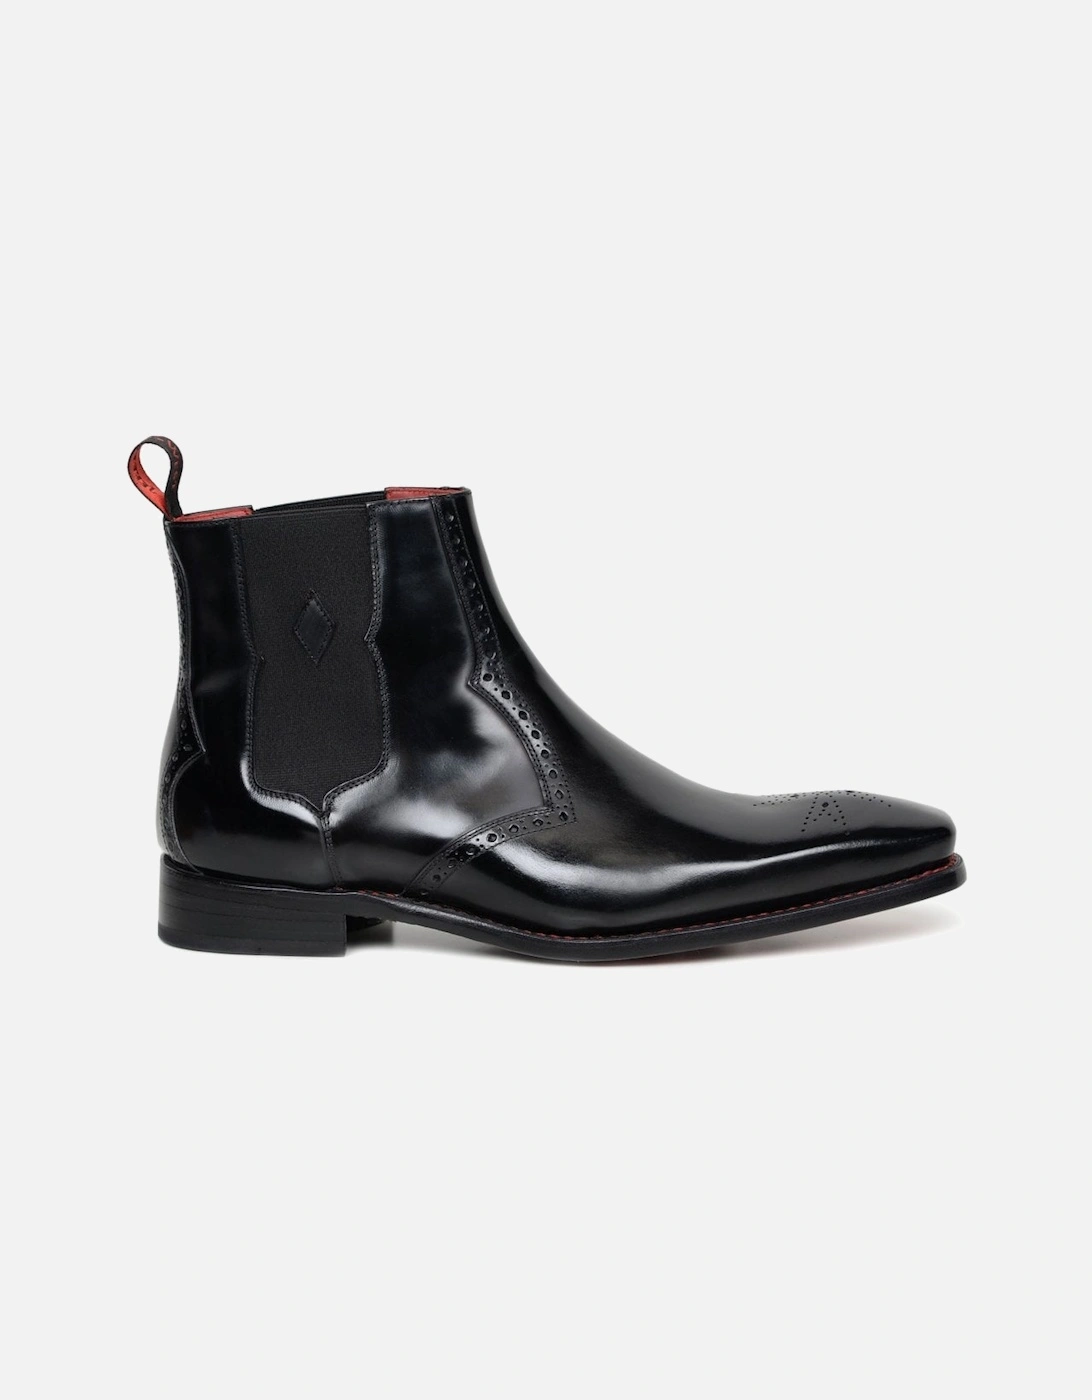 Hunger Bowie Mens Chelsea Boots